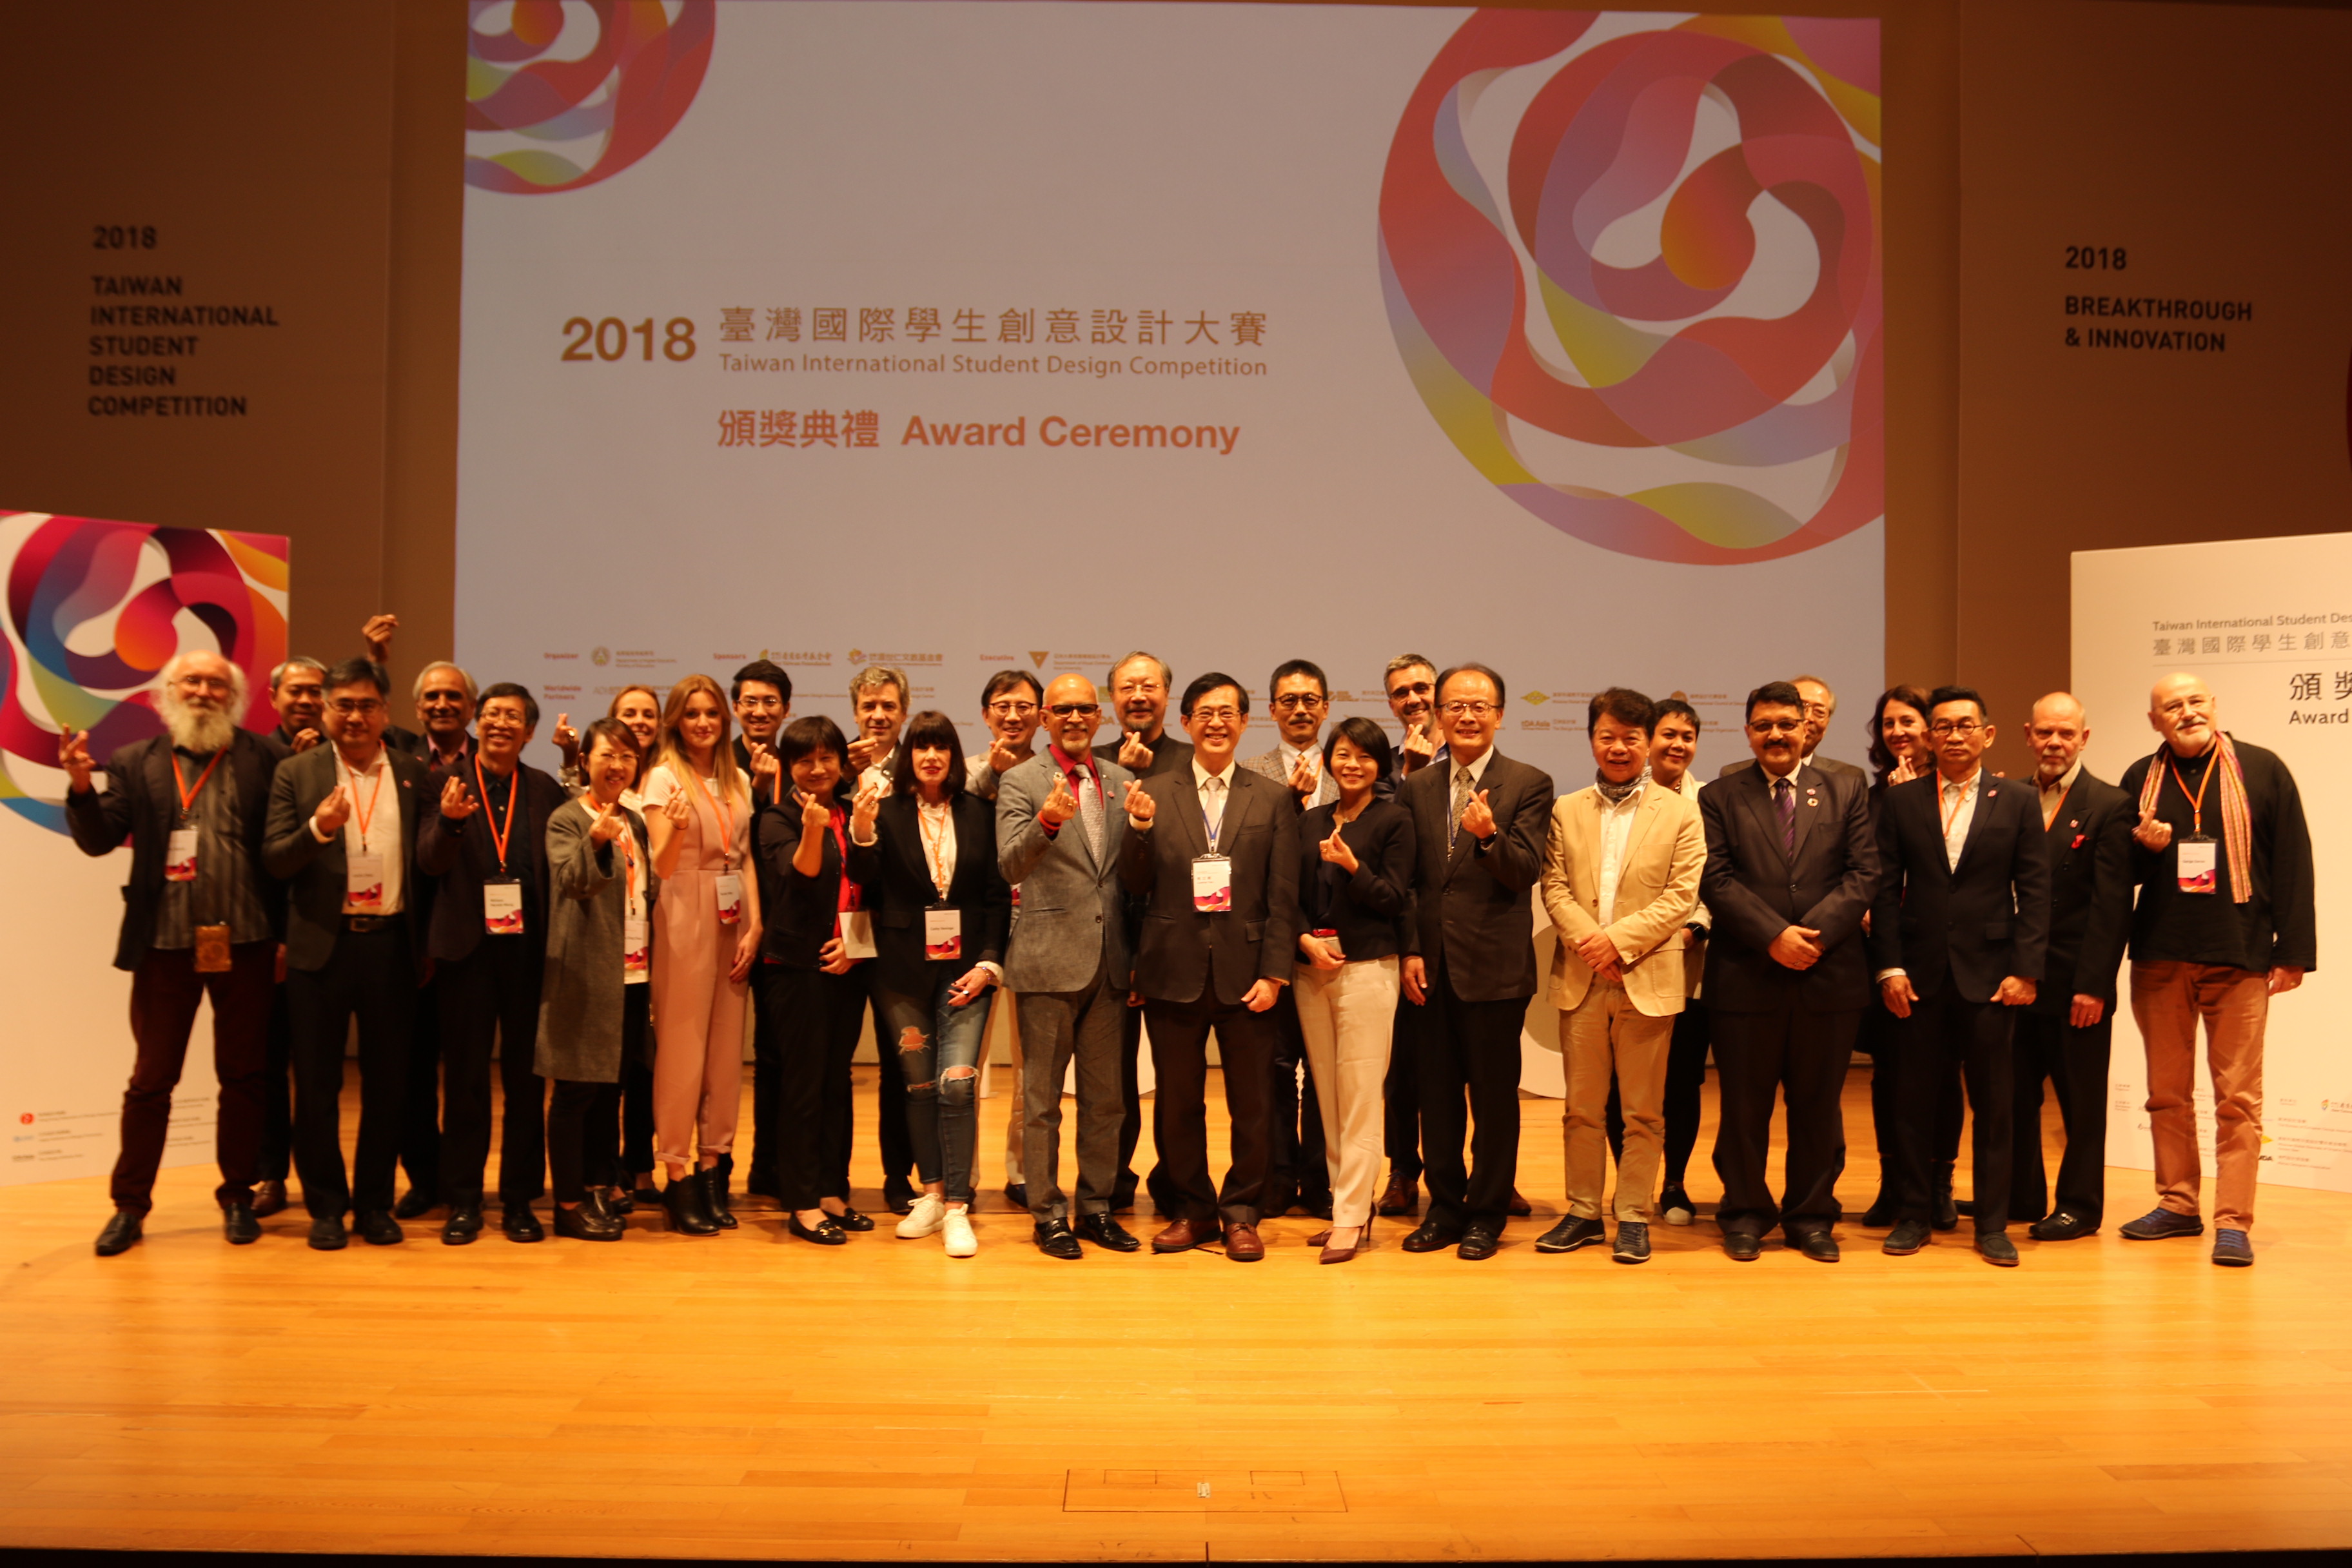 “Breakthrough and Innovation” by Global Design Talent of the Future 2018 Taiwan International Student Design Competition Holds Award Ceremony